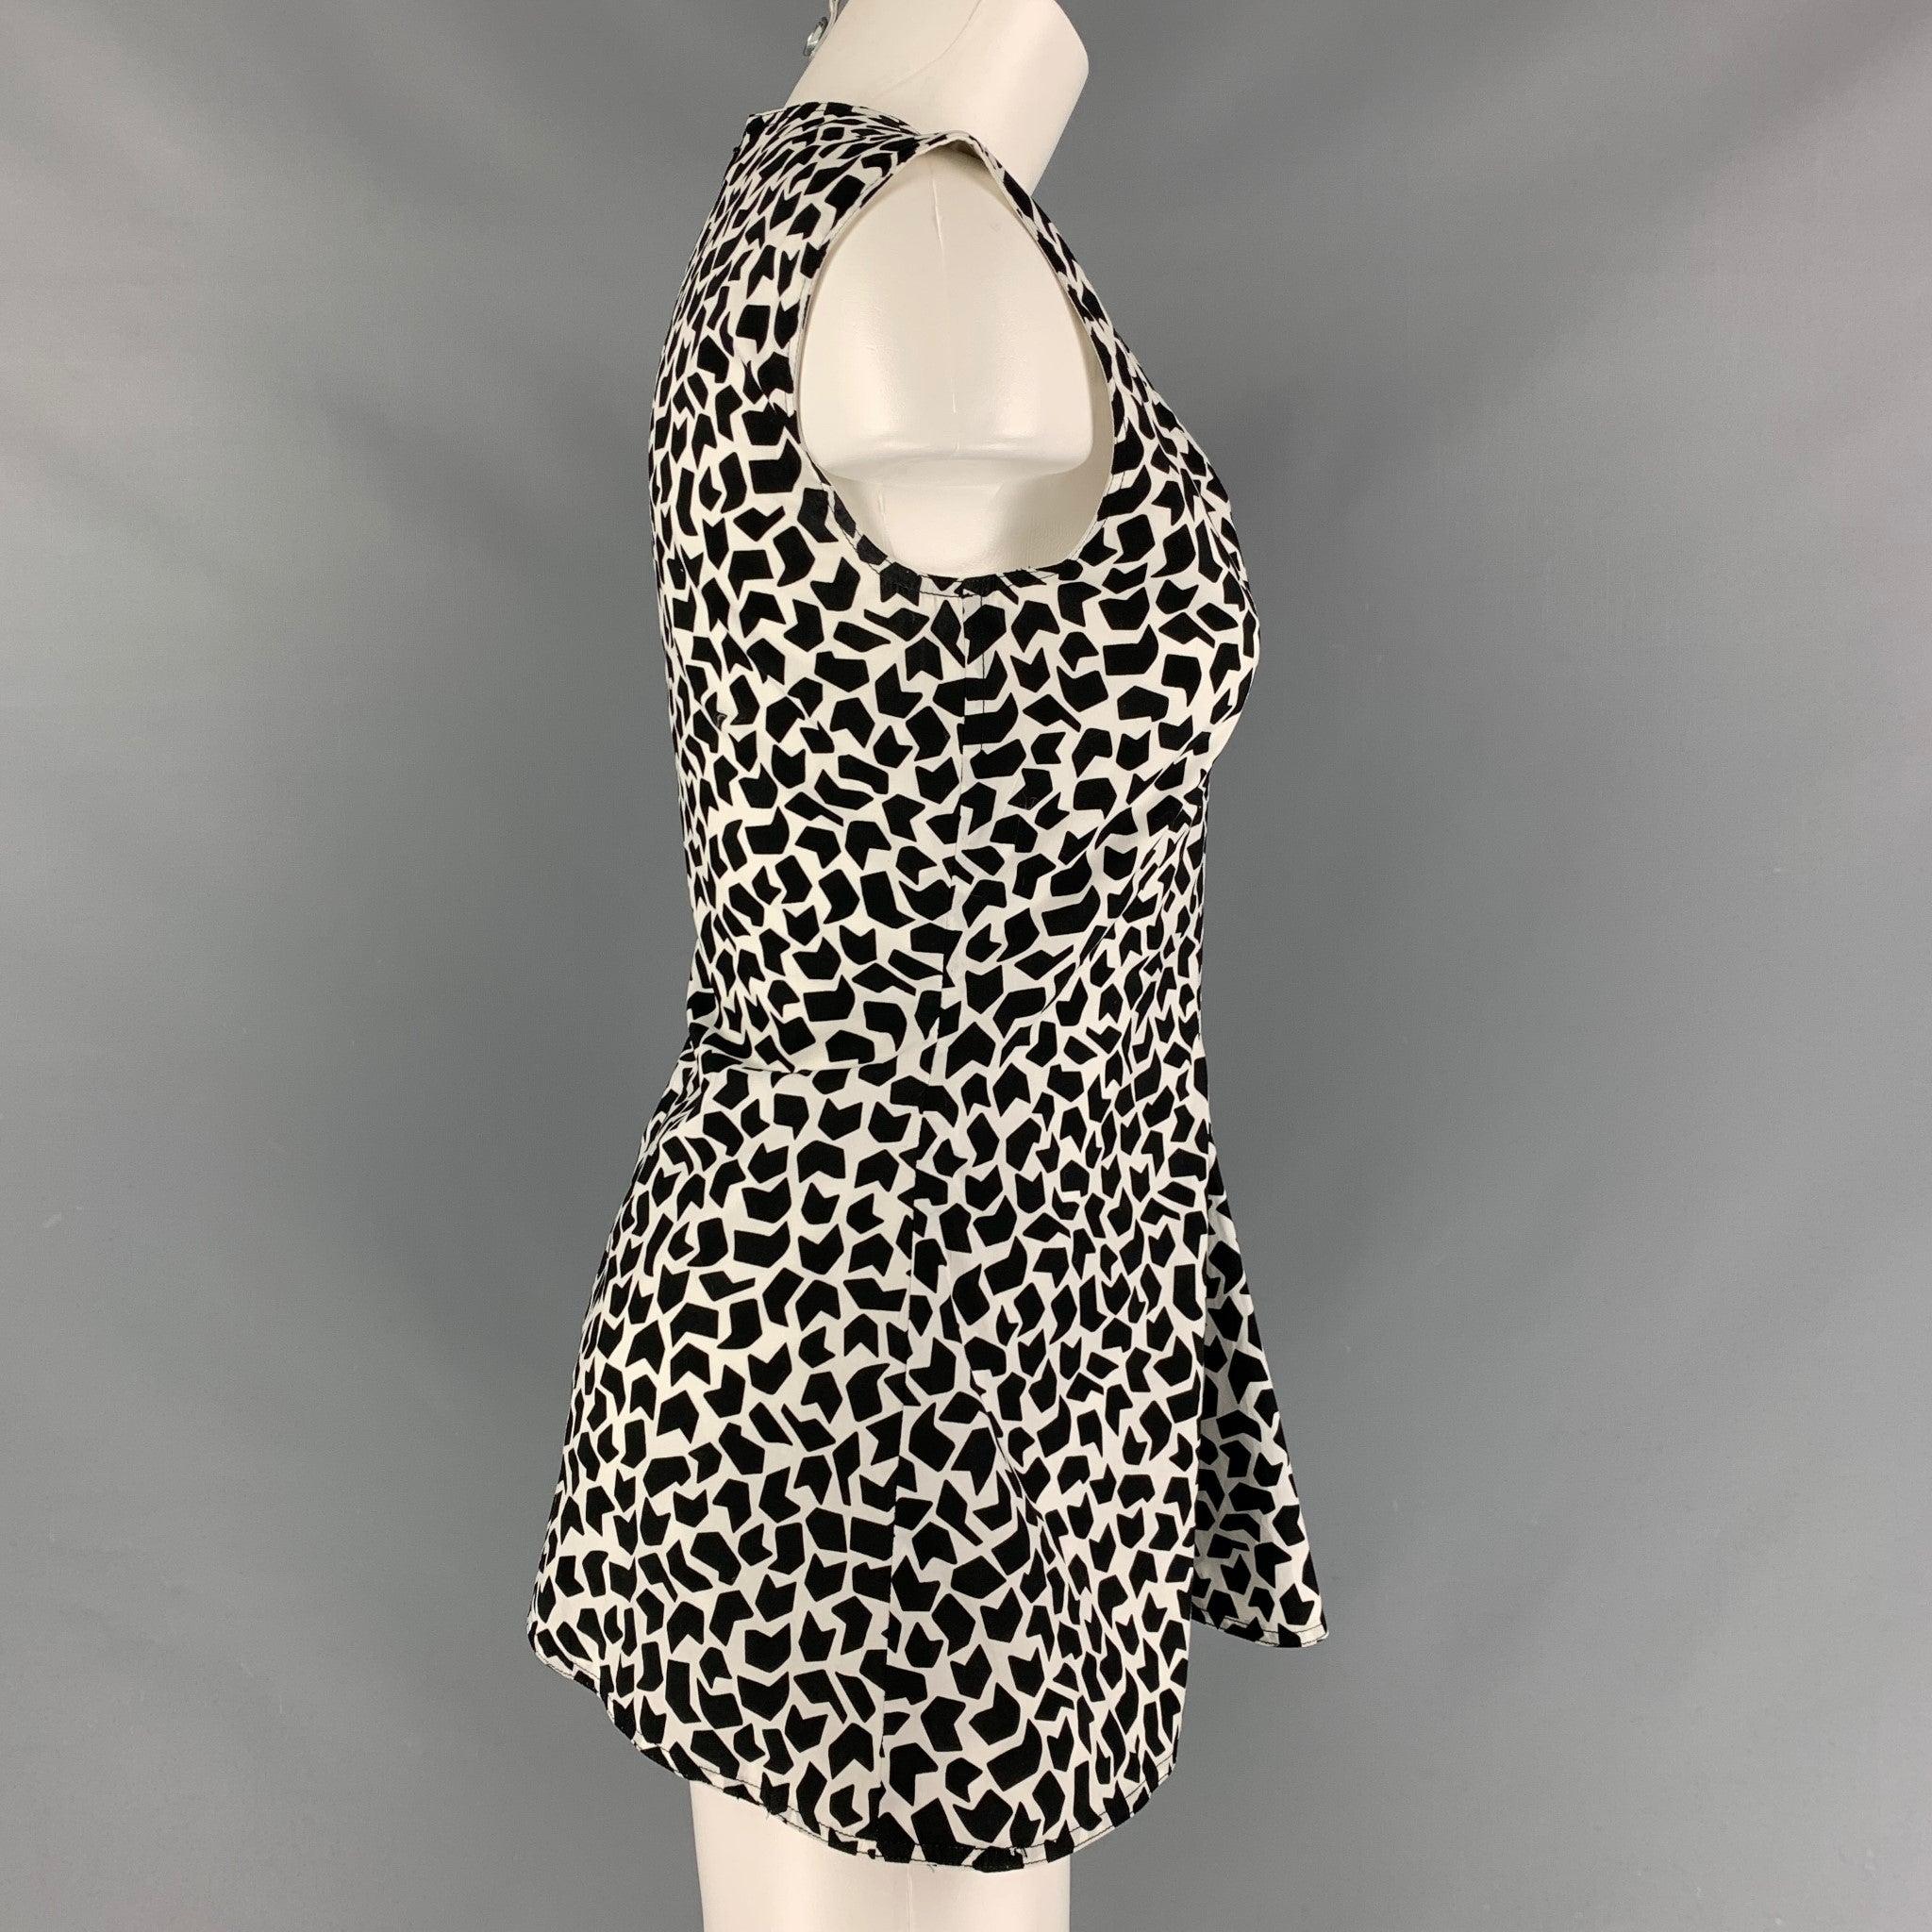 MARNI sleeveless tunic comes in a black and white abstract print cotton poplin featuring an open V-neck shape, and full zip up closure at center back. Made in Italy.Excellent Pre-Owned Condition. 
 

 Marked:  36 
 

 Measurements: 
  
 Shoulder: 16